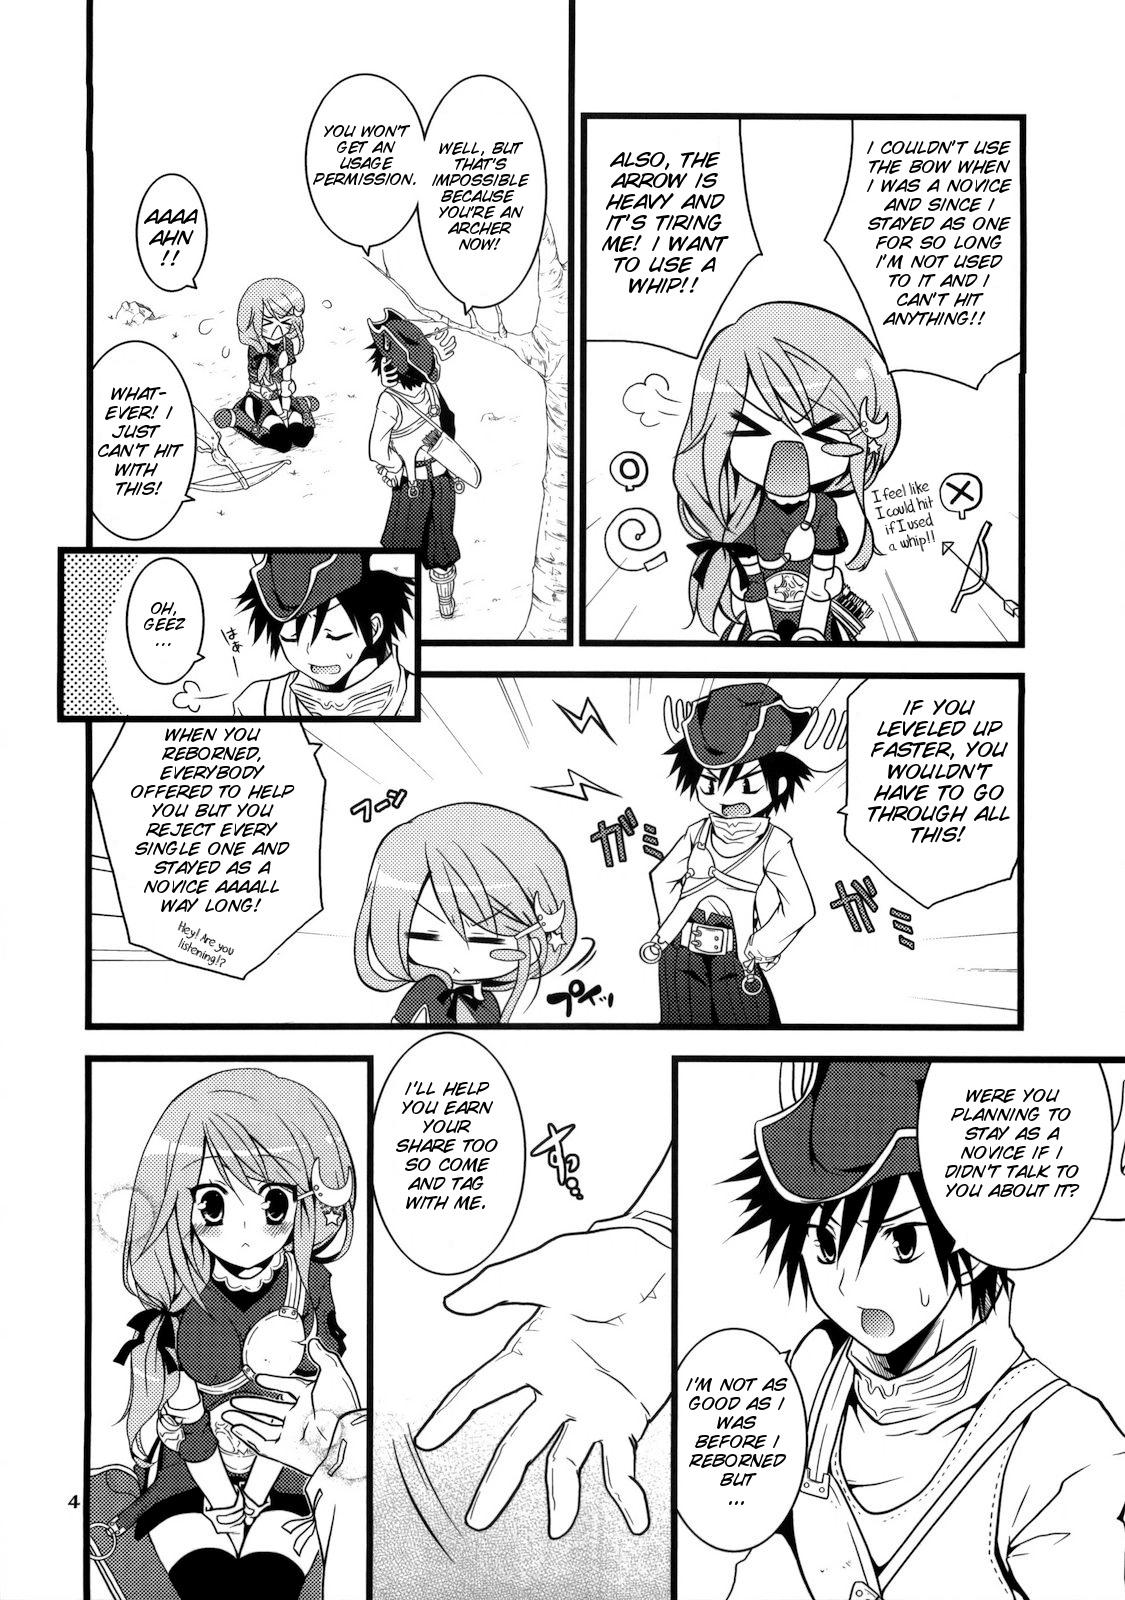 Shy Daily RO 3 - Ragnarok online Best Blowjob - Page 6